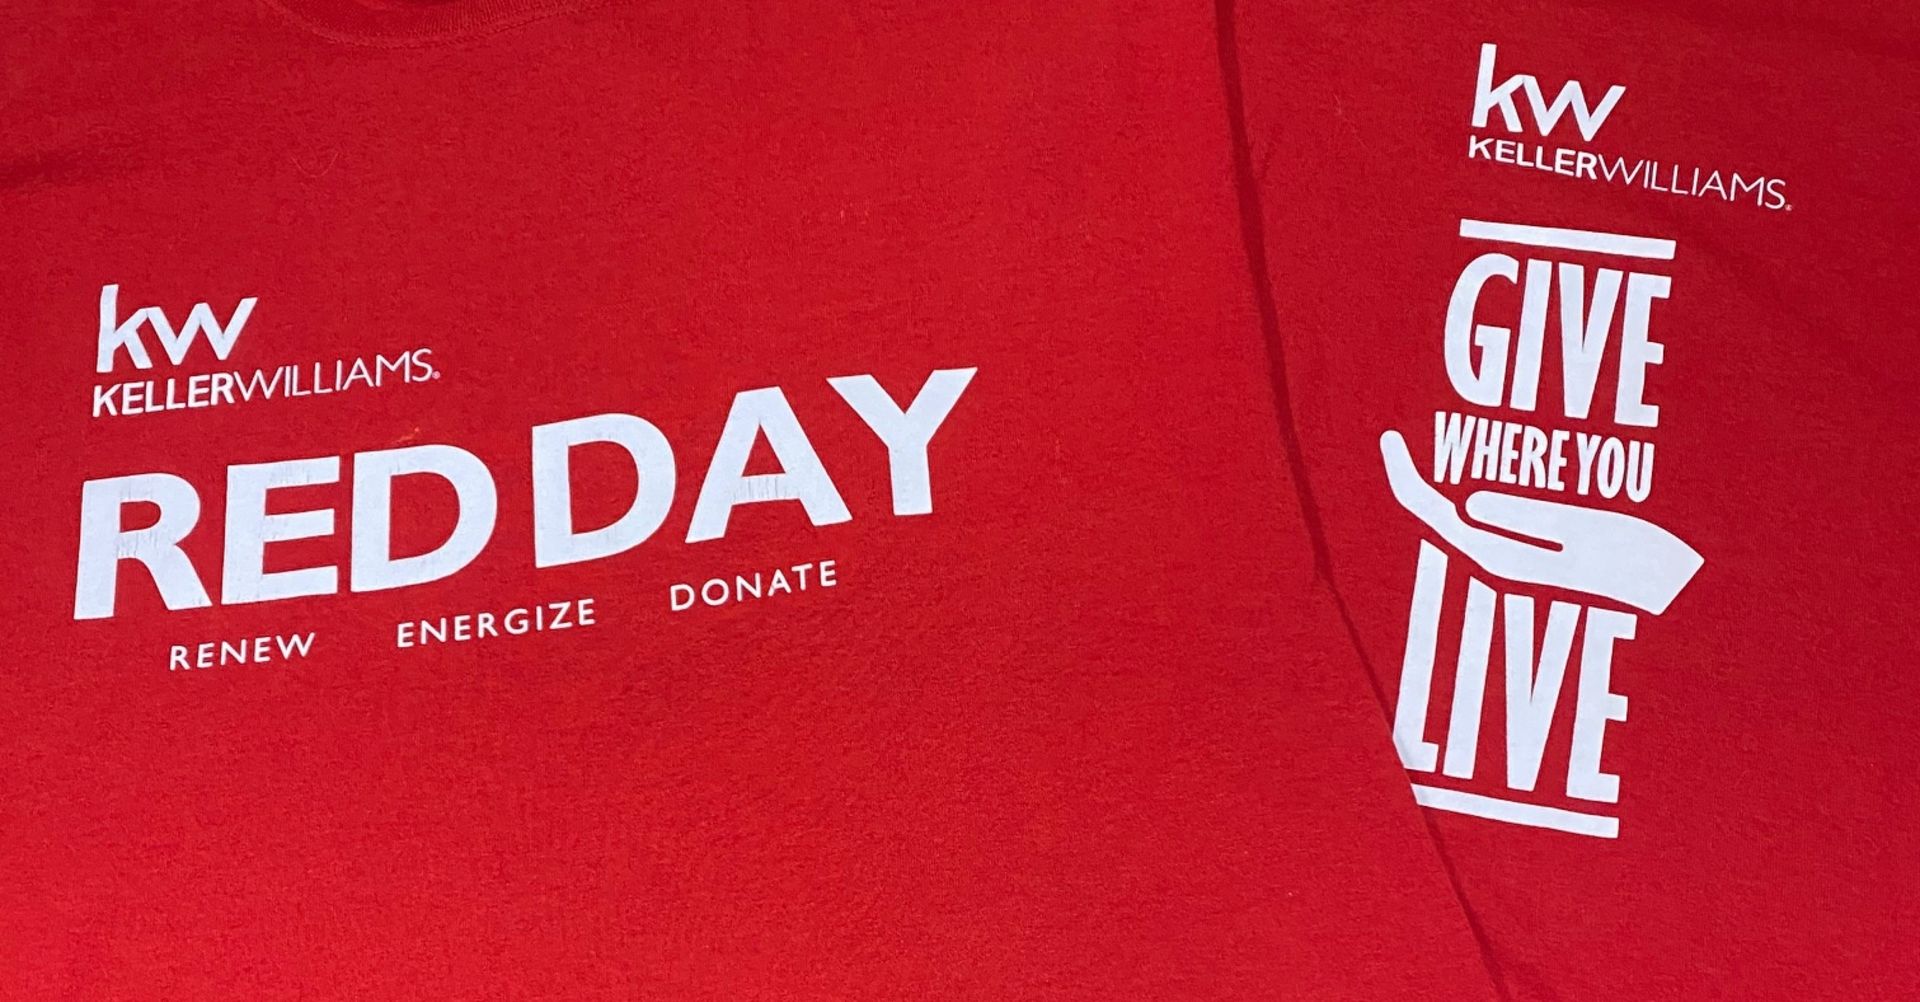 Keller Williams' Red Day is Here Once Again! "Making People Our Purpose"